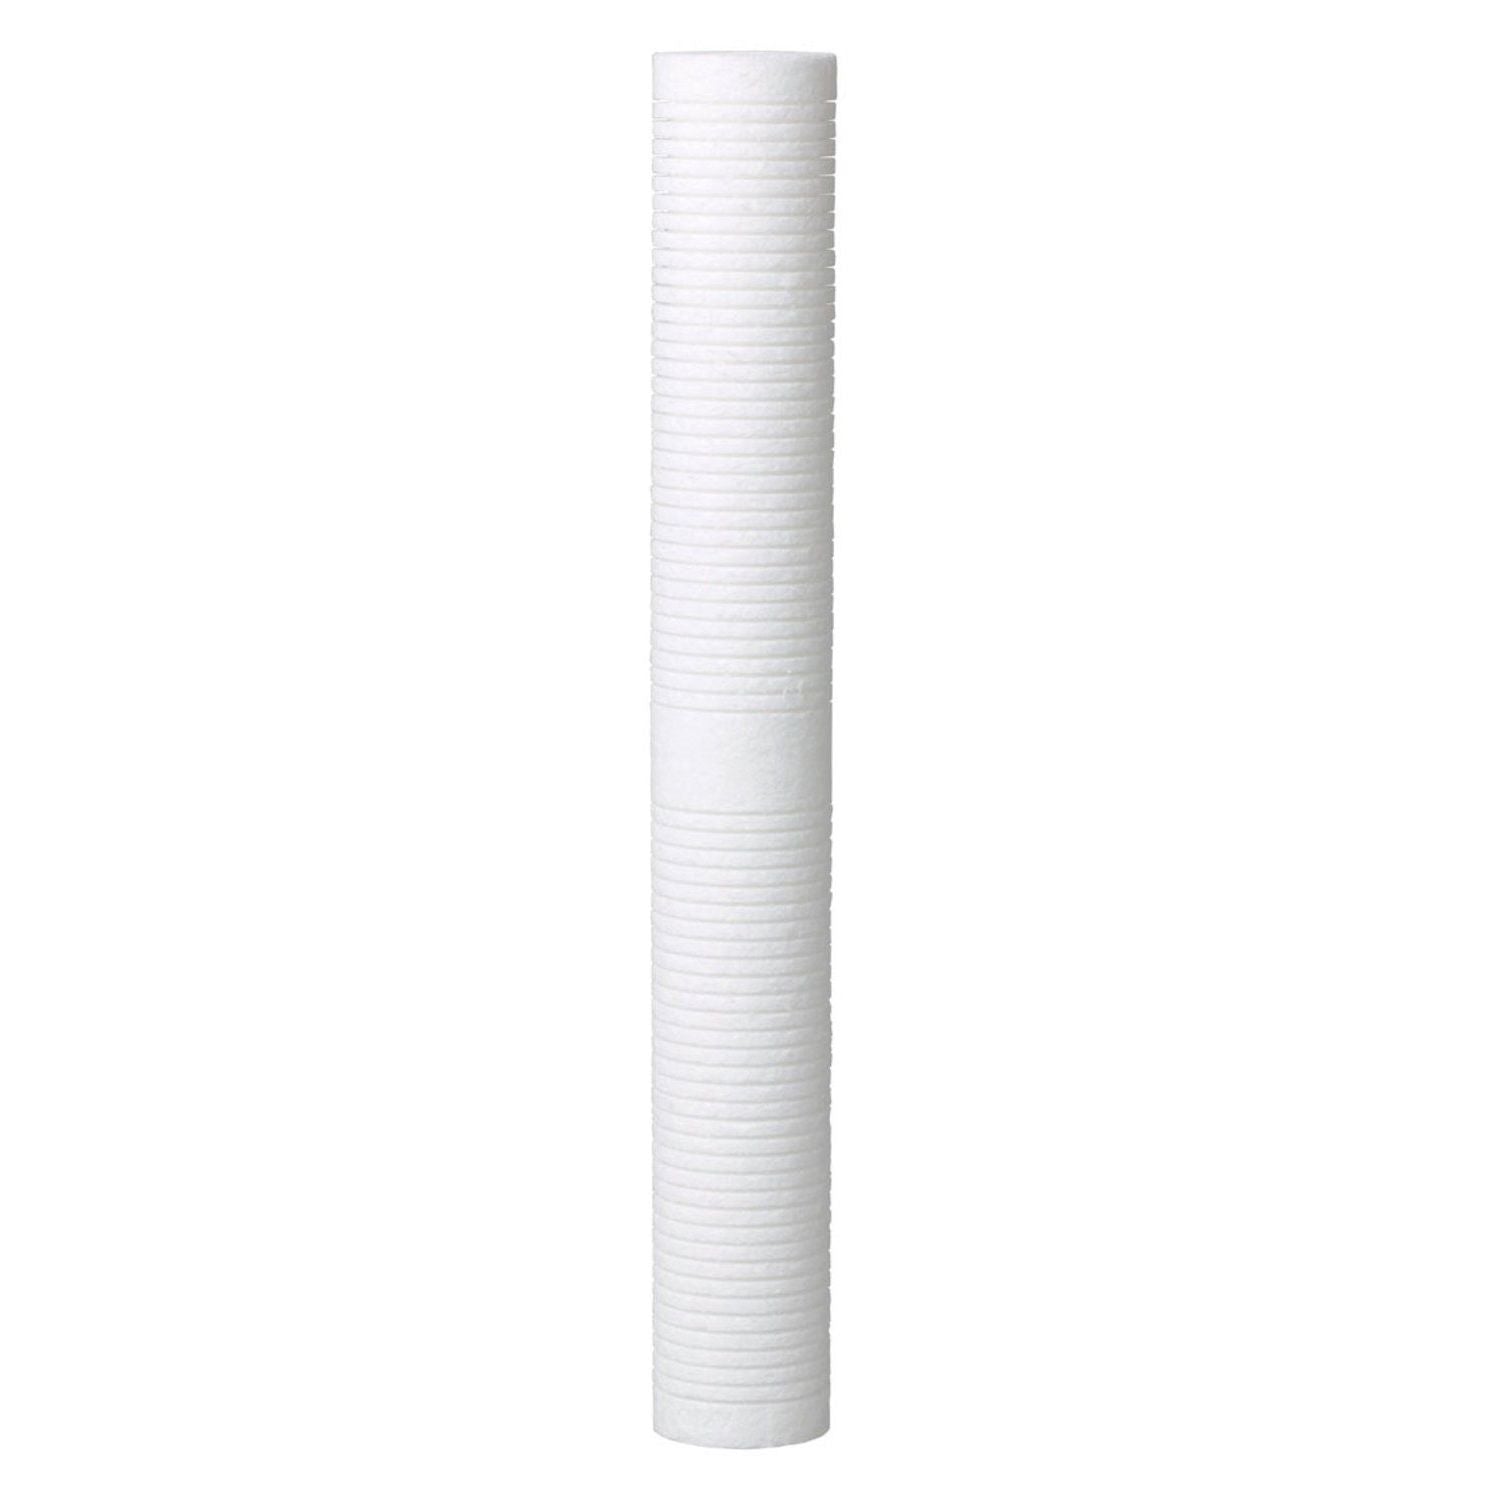 3M Aqua-Pure AP110-2 Whole House Water Filter Replacement Cartridge